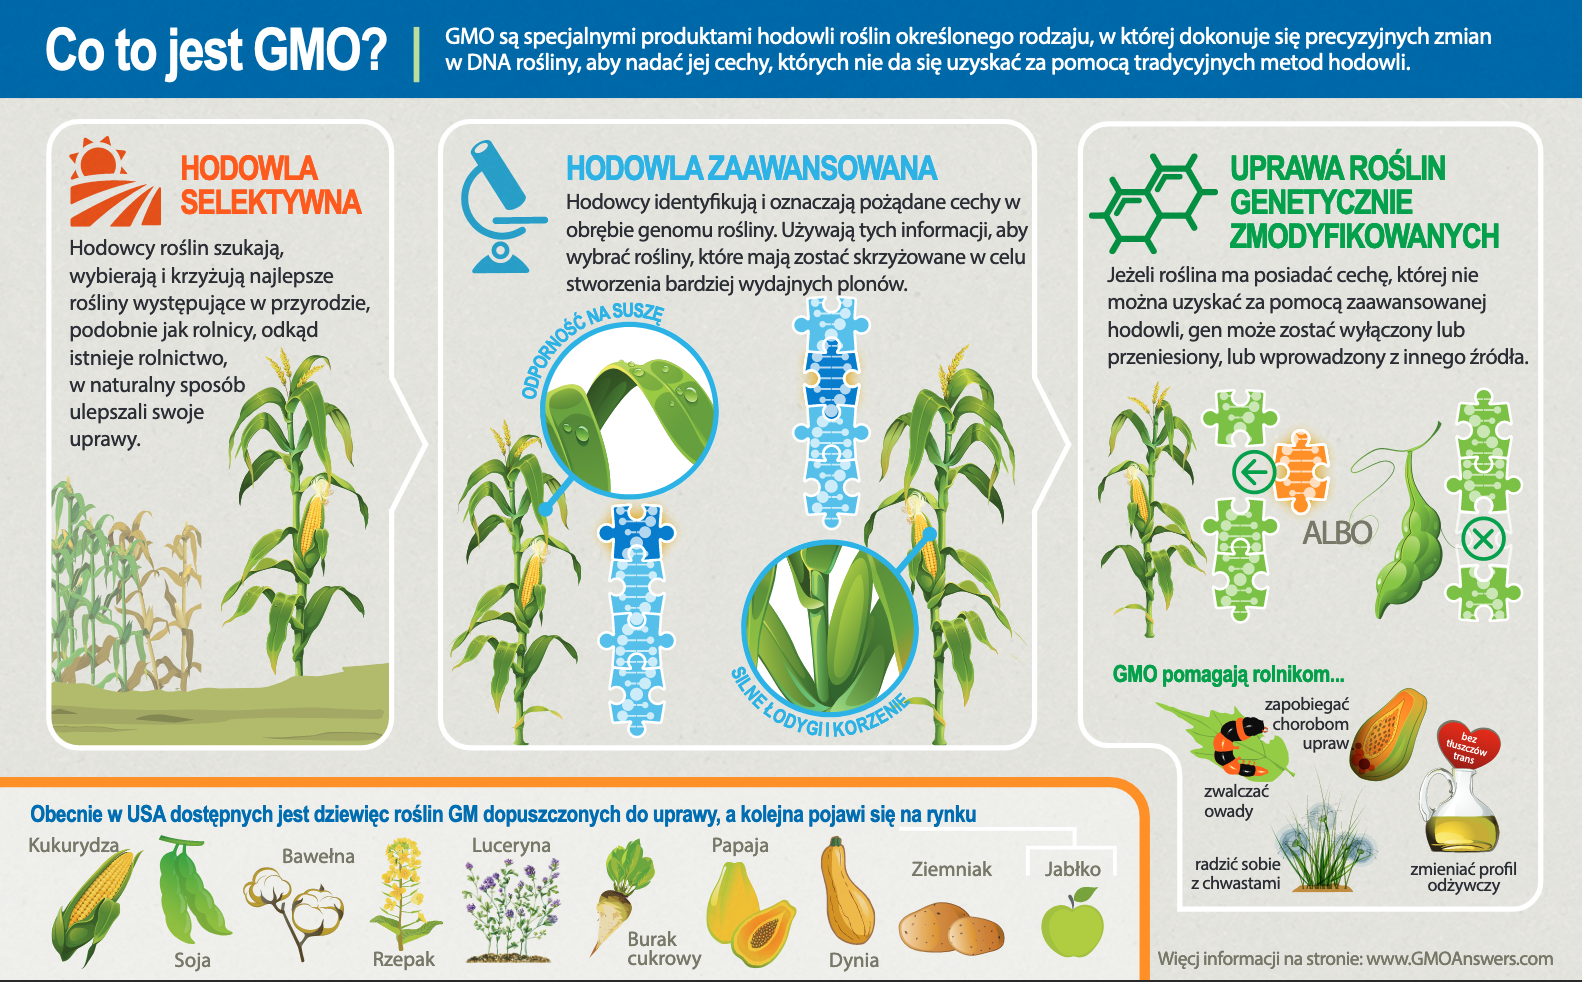 Infographic - What is a GMO